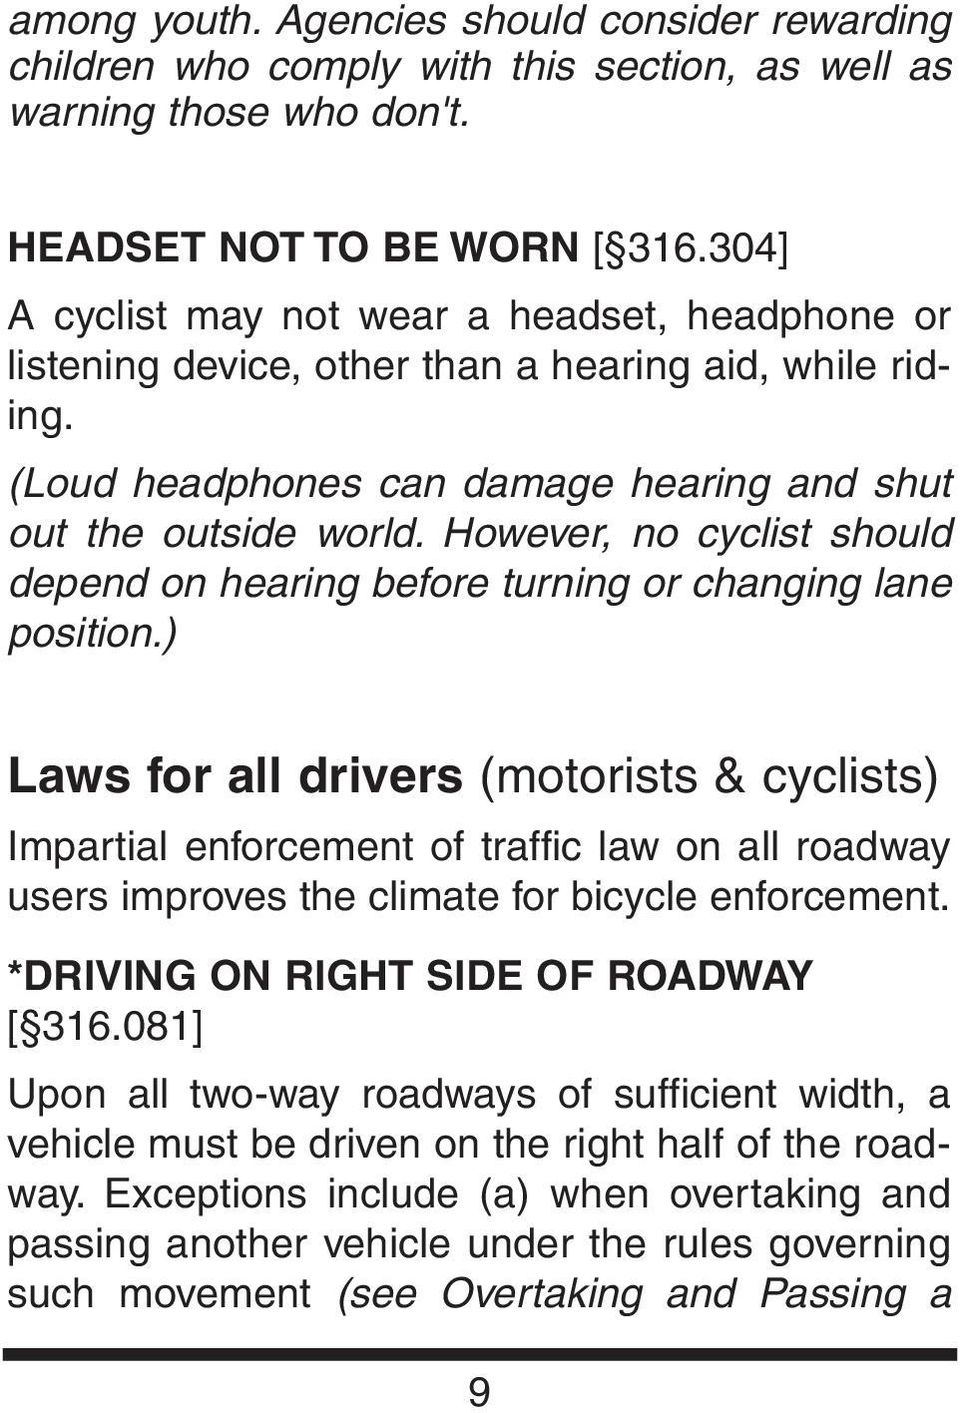 However, no cyclist should depend on hearing before turning or changing lane position.